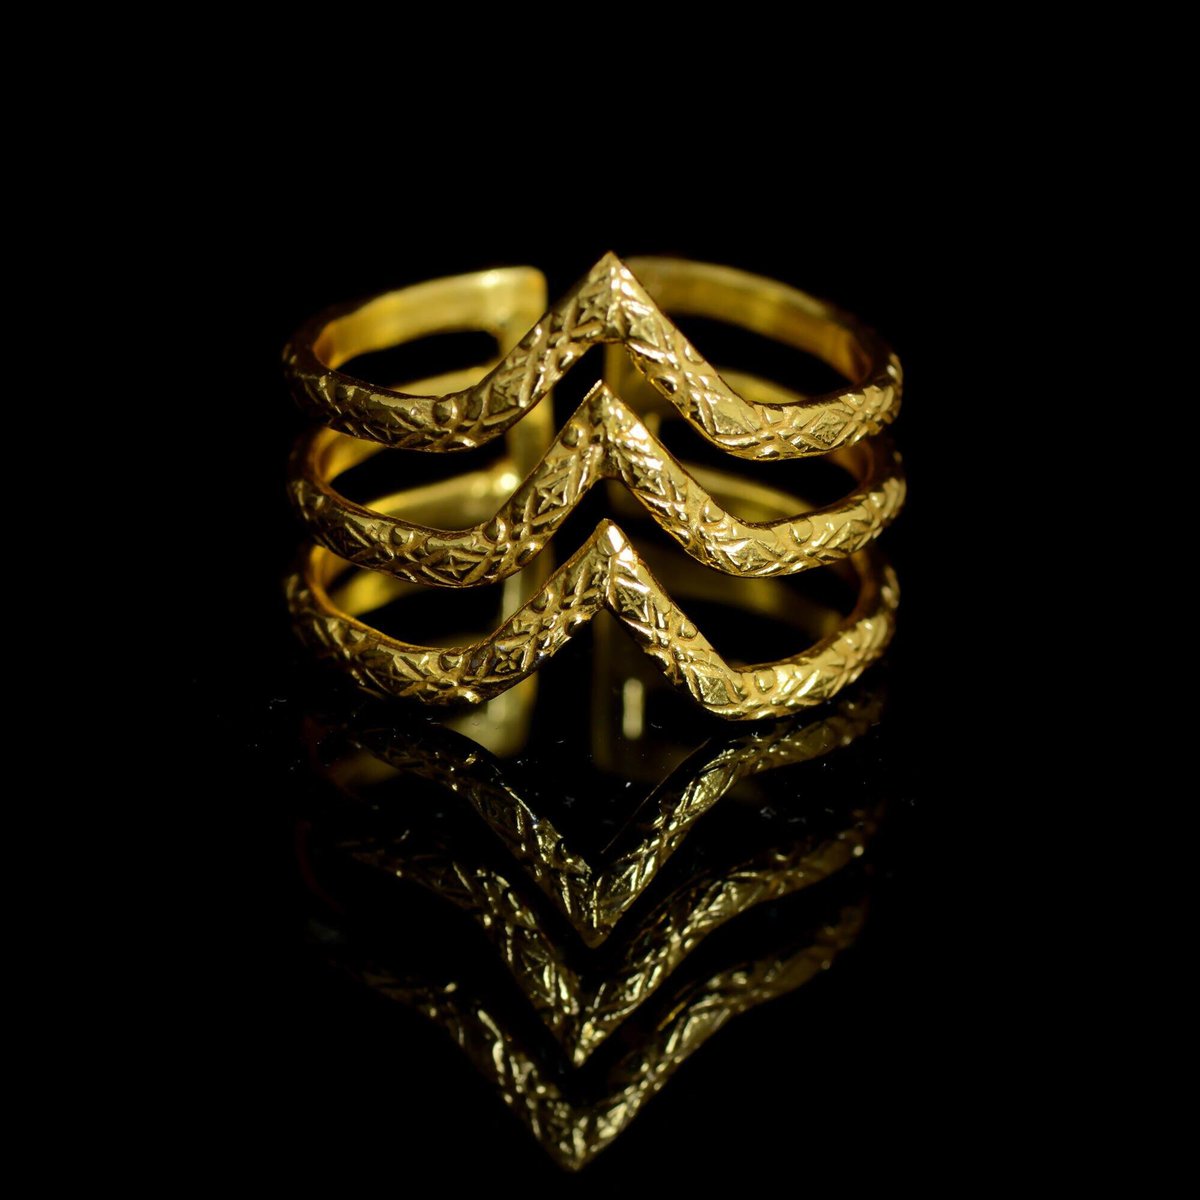 Excited to share the latest addition to my #etsy shop: V-Chevron Arthritis Ring etsy.me/3VyaOp6 #gold #lovefriendship #yes #no #unisexadults #brass #minimalist #arthritisring #goldfilledring